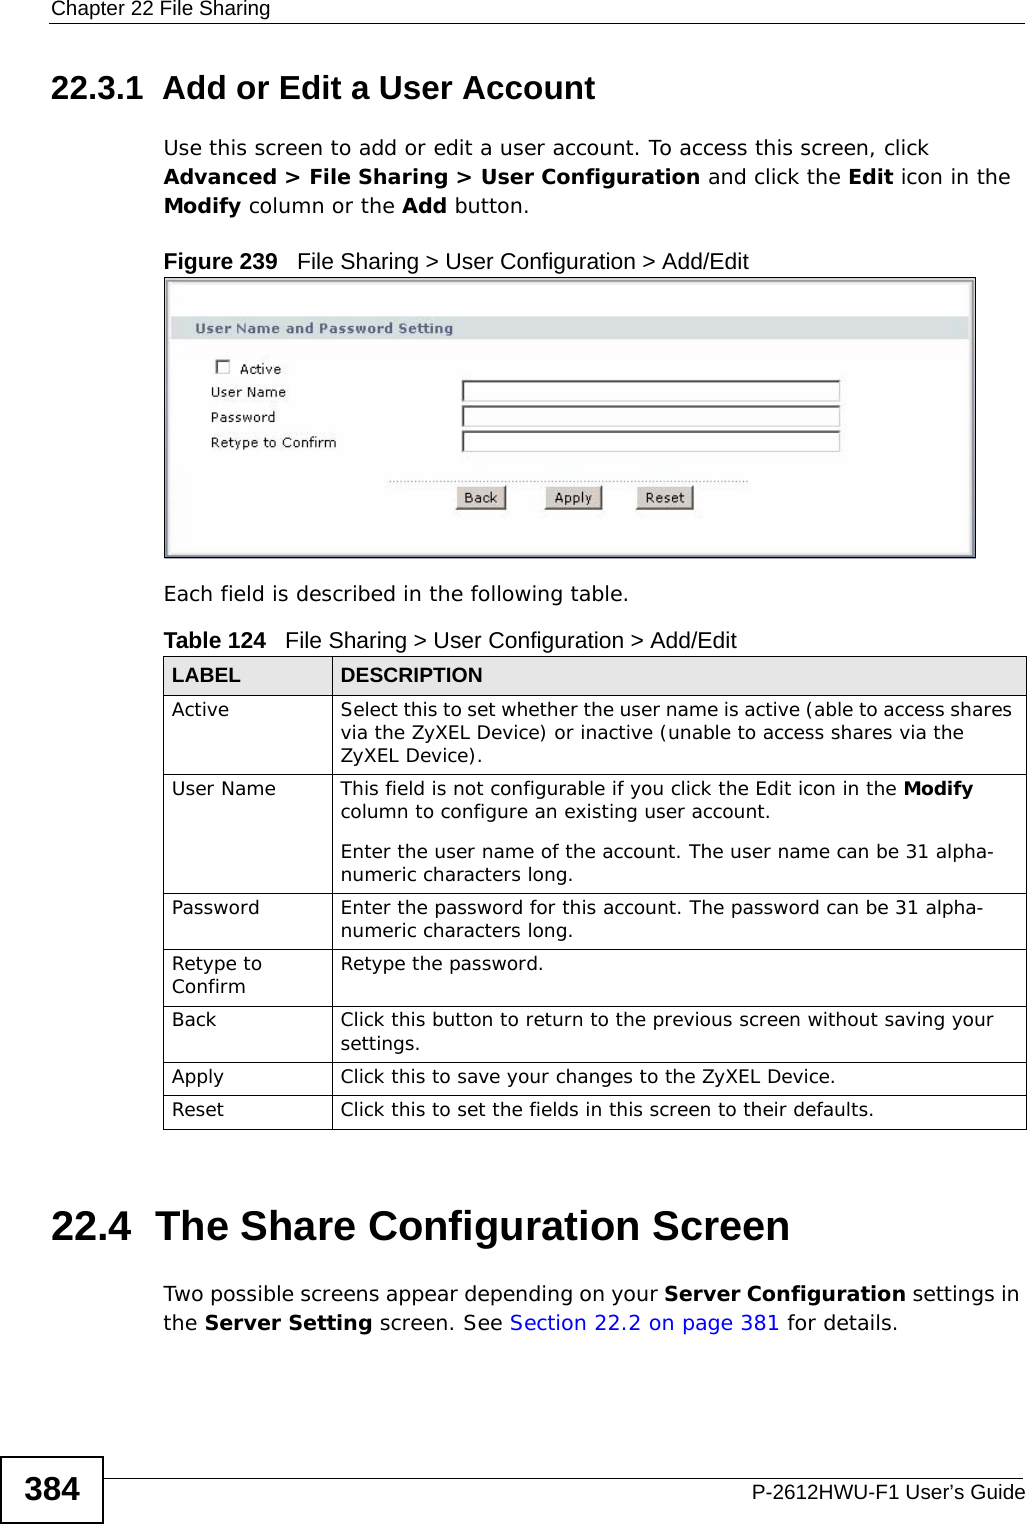 Chapter 22 File SharingP-2612HWU-F1 User’s Guide38422.3.1  Add or Edit a User AccountUse this screen to add or edit a user account. To access this screen, click Advanced &gt; File Sharing &gt; User Configuration and click the Edit icon in the Modify column or the Add button.Figure 239   File Sharing &gt; User Configuration &gt; Add/Edit Each field is described in the following table.22.4  The Share Configuration ScreenTwo possible screens appear depending on your Server Configuration settings in the Server Setting screen. See Section 22.2 on page 381 for details.Table 124   File Sharing &gt; User Configuration &gt; Add/Edit LABEL DESCRIPTIONActive Select this to set whether the user name is active (able to access shares via the ZyXEL Device) or inactive (unable to access shares via the ZyXEL Device). User Name This field is not configurable if you click the Edit icon in the Modify column to configure an existing user account.Enter the user name of the account. The user name can be 31 alpha-numeric characters long. Password Enter the password for this account. The password can be 31 alpha-numeric characters long.Retype to Confirm Retype the password.Back Click this button to return to the previous screen without saving your settings.Apply Click this to save your changes to the ZyXEL Device.Reset Click this to set the fields in this screen to their defaults. 